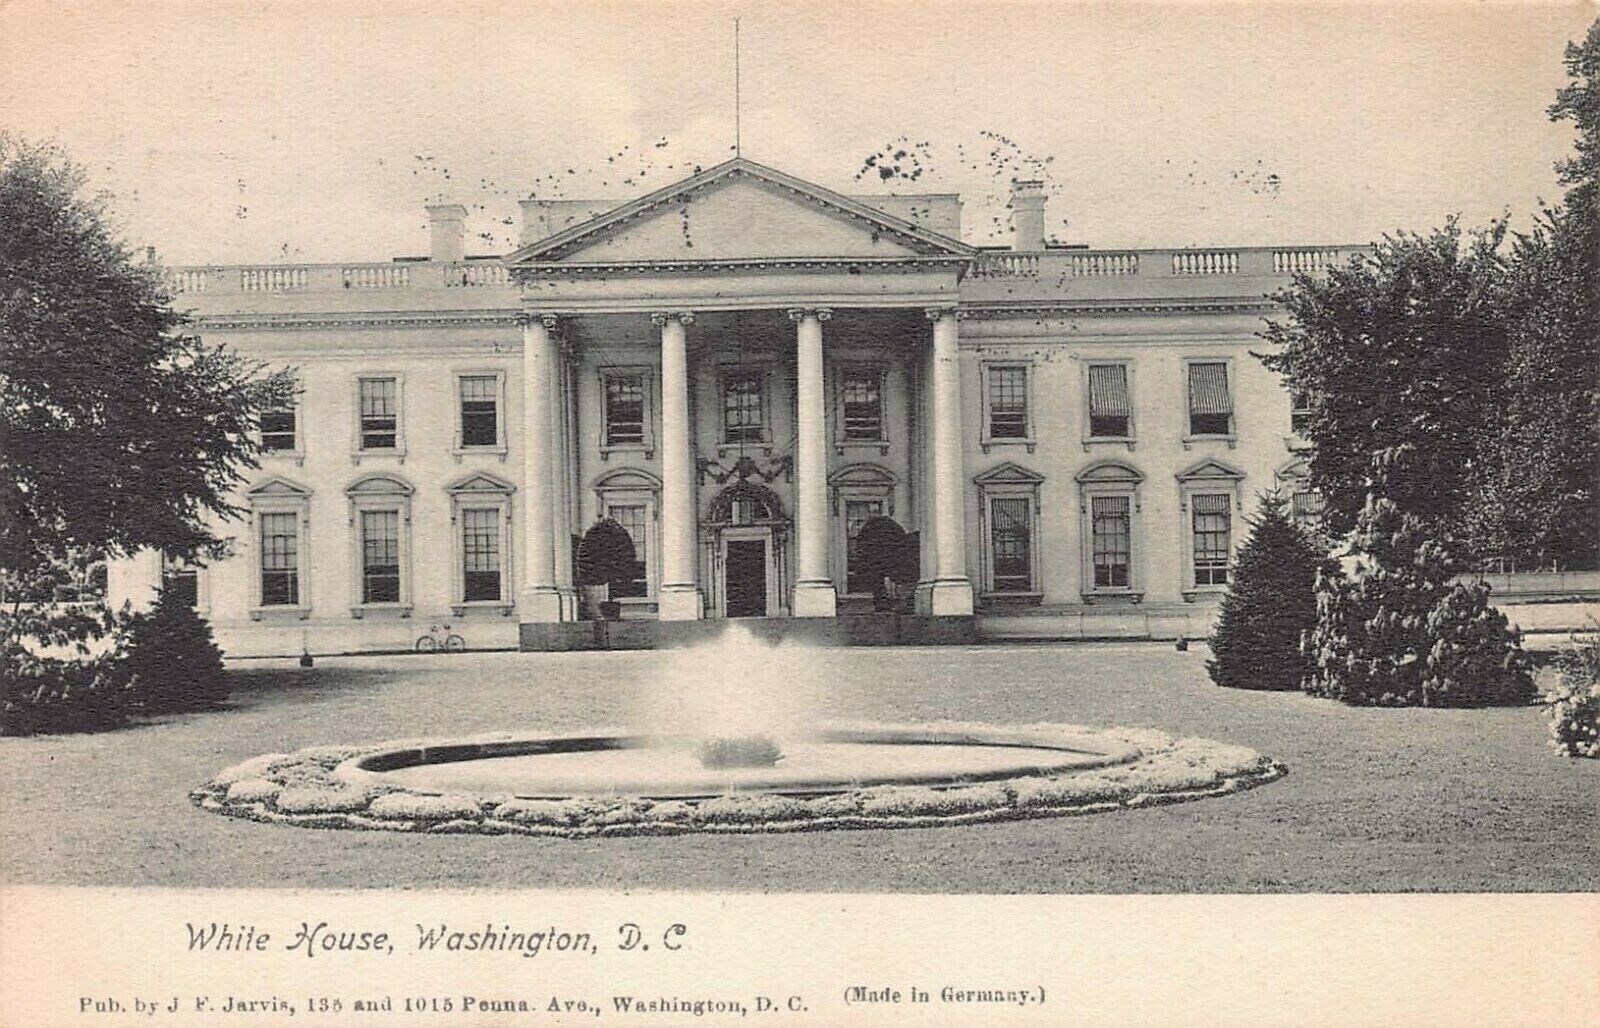 The White House, Washington, D.C., Very Early Postcard, Used in 1907